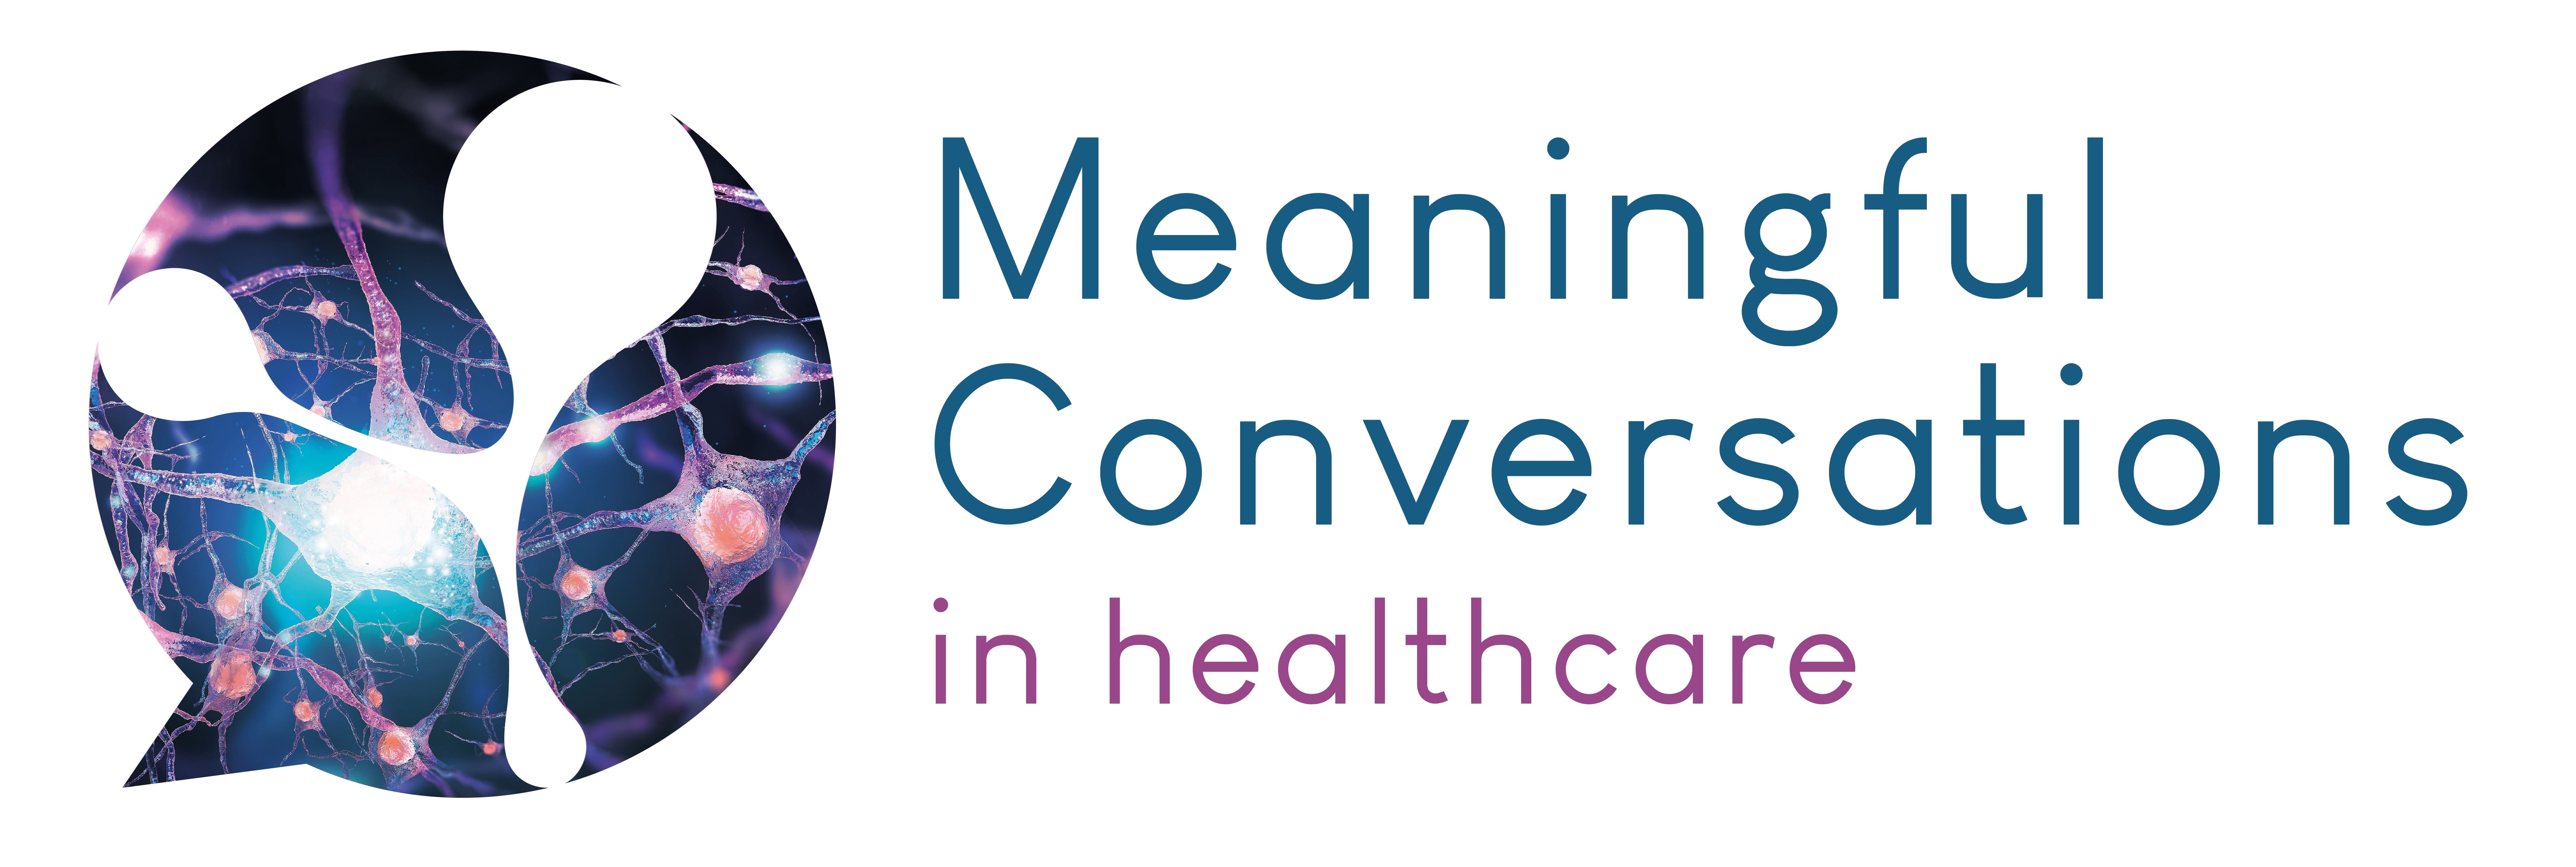 Meaningful Conversations in Healthcare logo